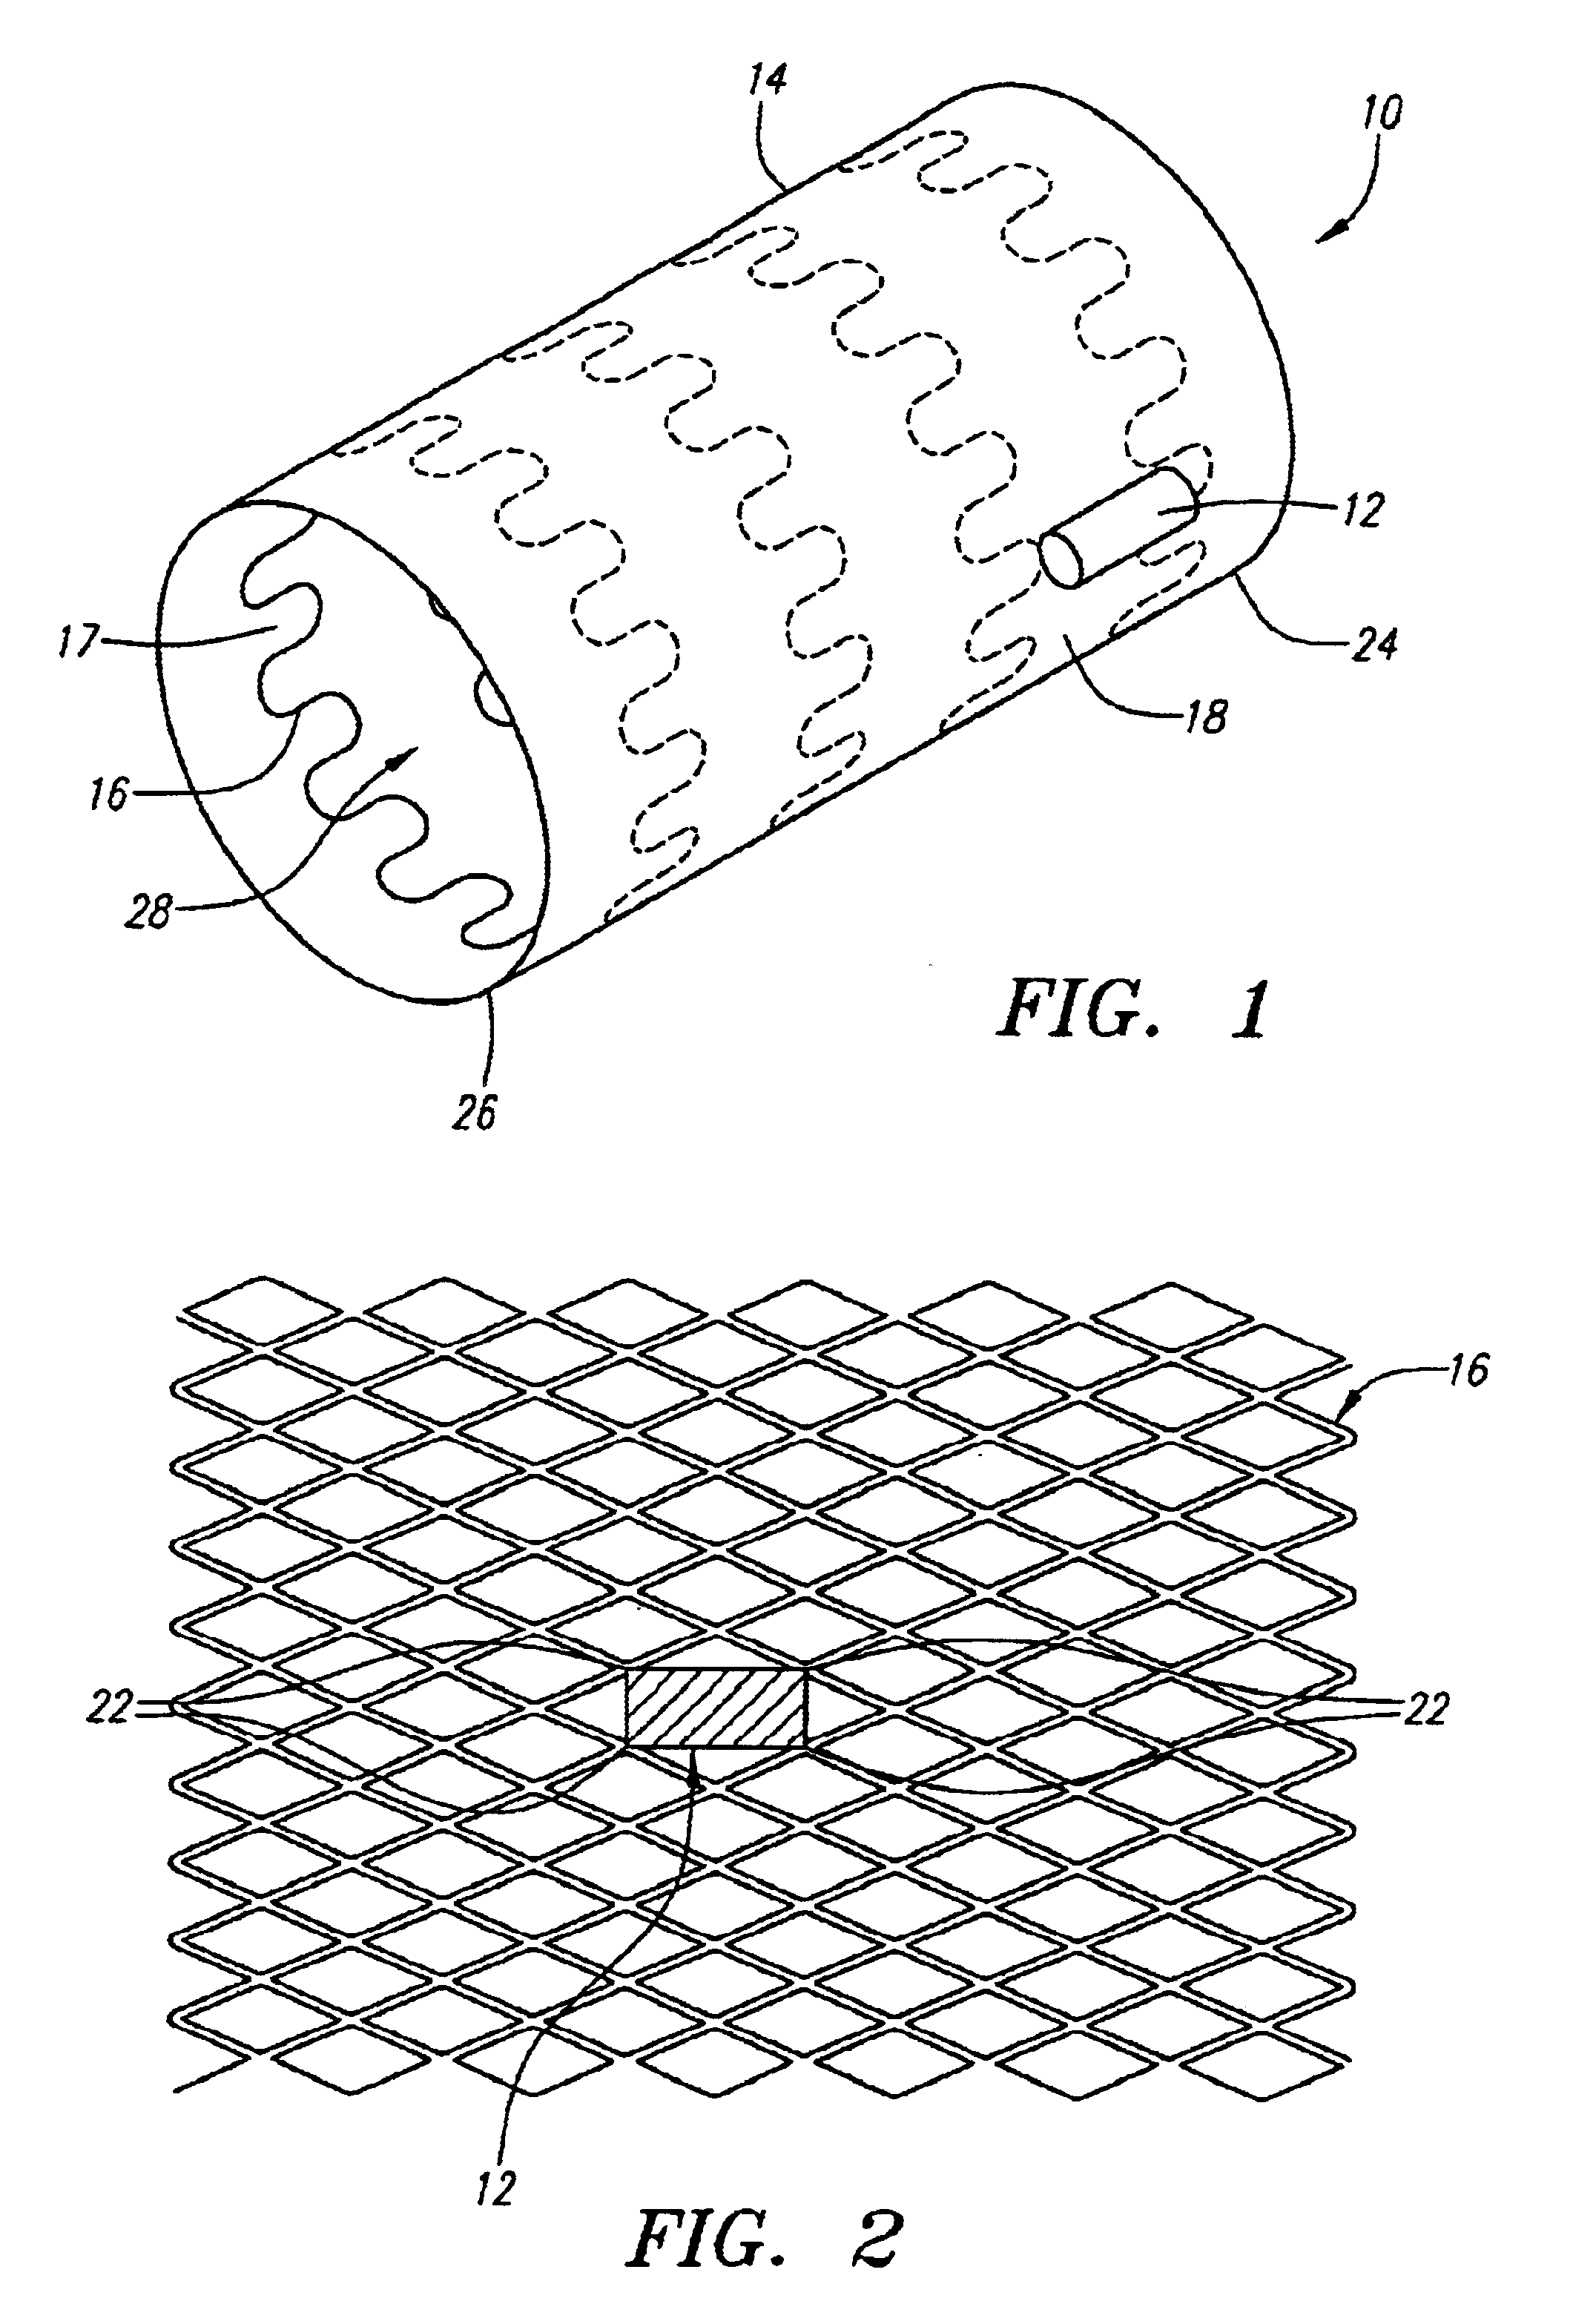 Systems and methods for deploying a biosensor with a stent graft